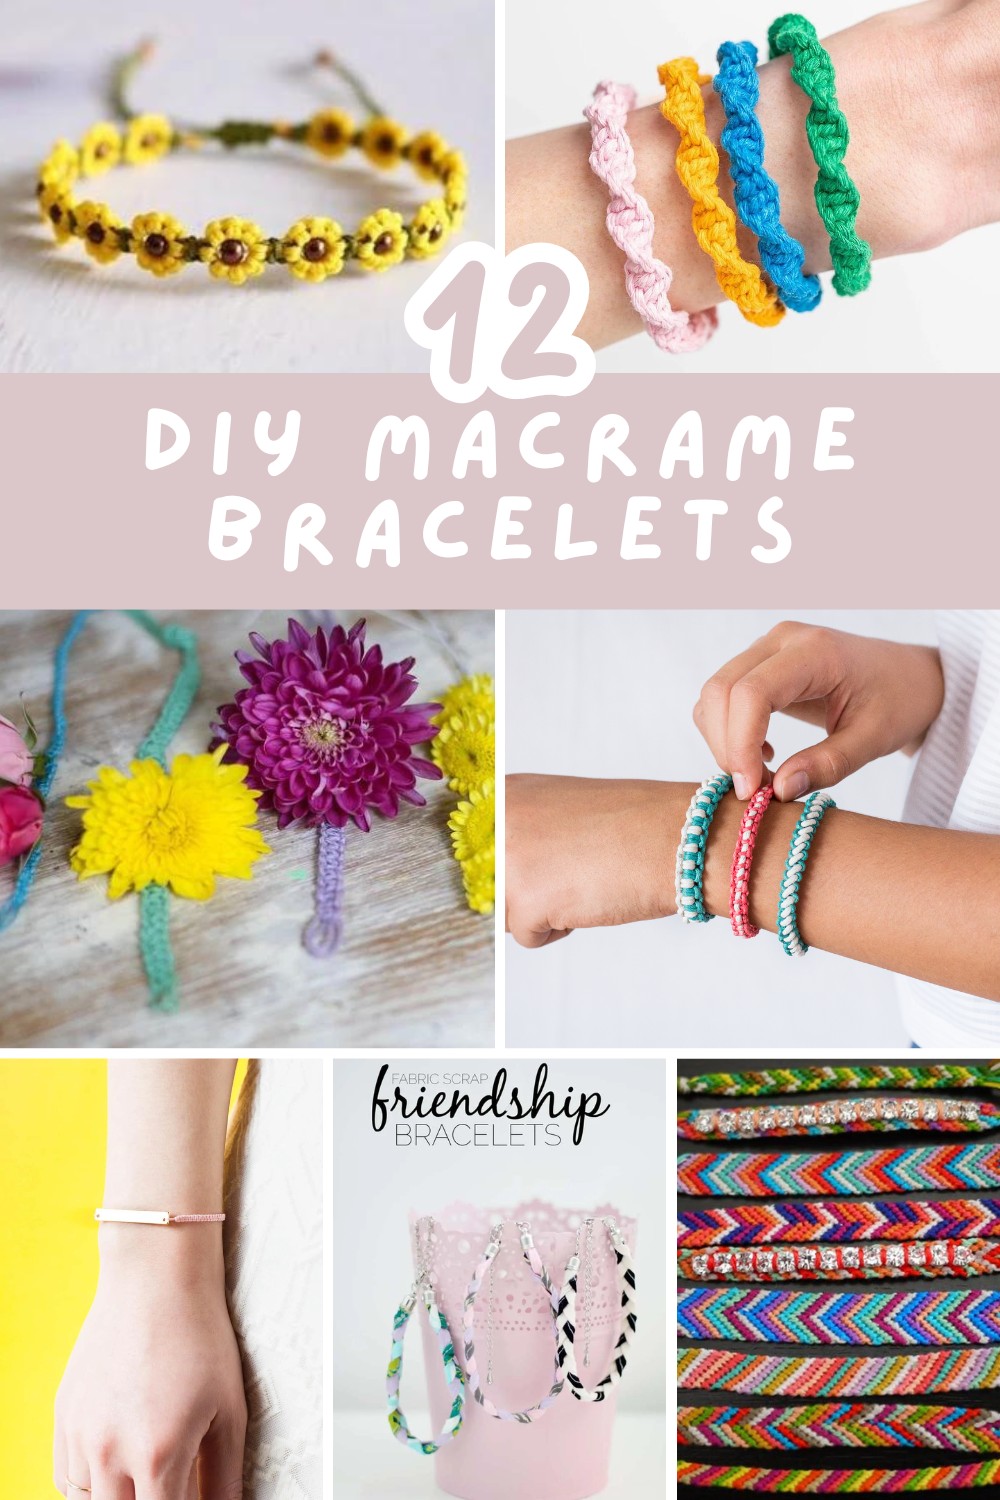 Discover 12 stunning macrame bracelet patterns with step-by-step videos! Perfect for adding a personal touch to your accessory collection, these tutorials will help you create beautiful bracelets with ease. Grab your cords and beads, and let's get started on this creative journey! 🌿 #MacrameLove #DIYBracelets #CreativeCrafts